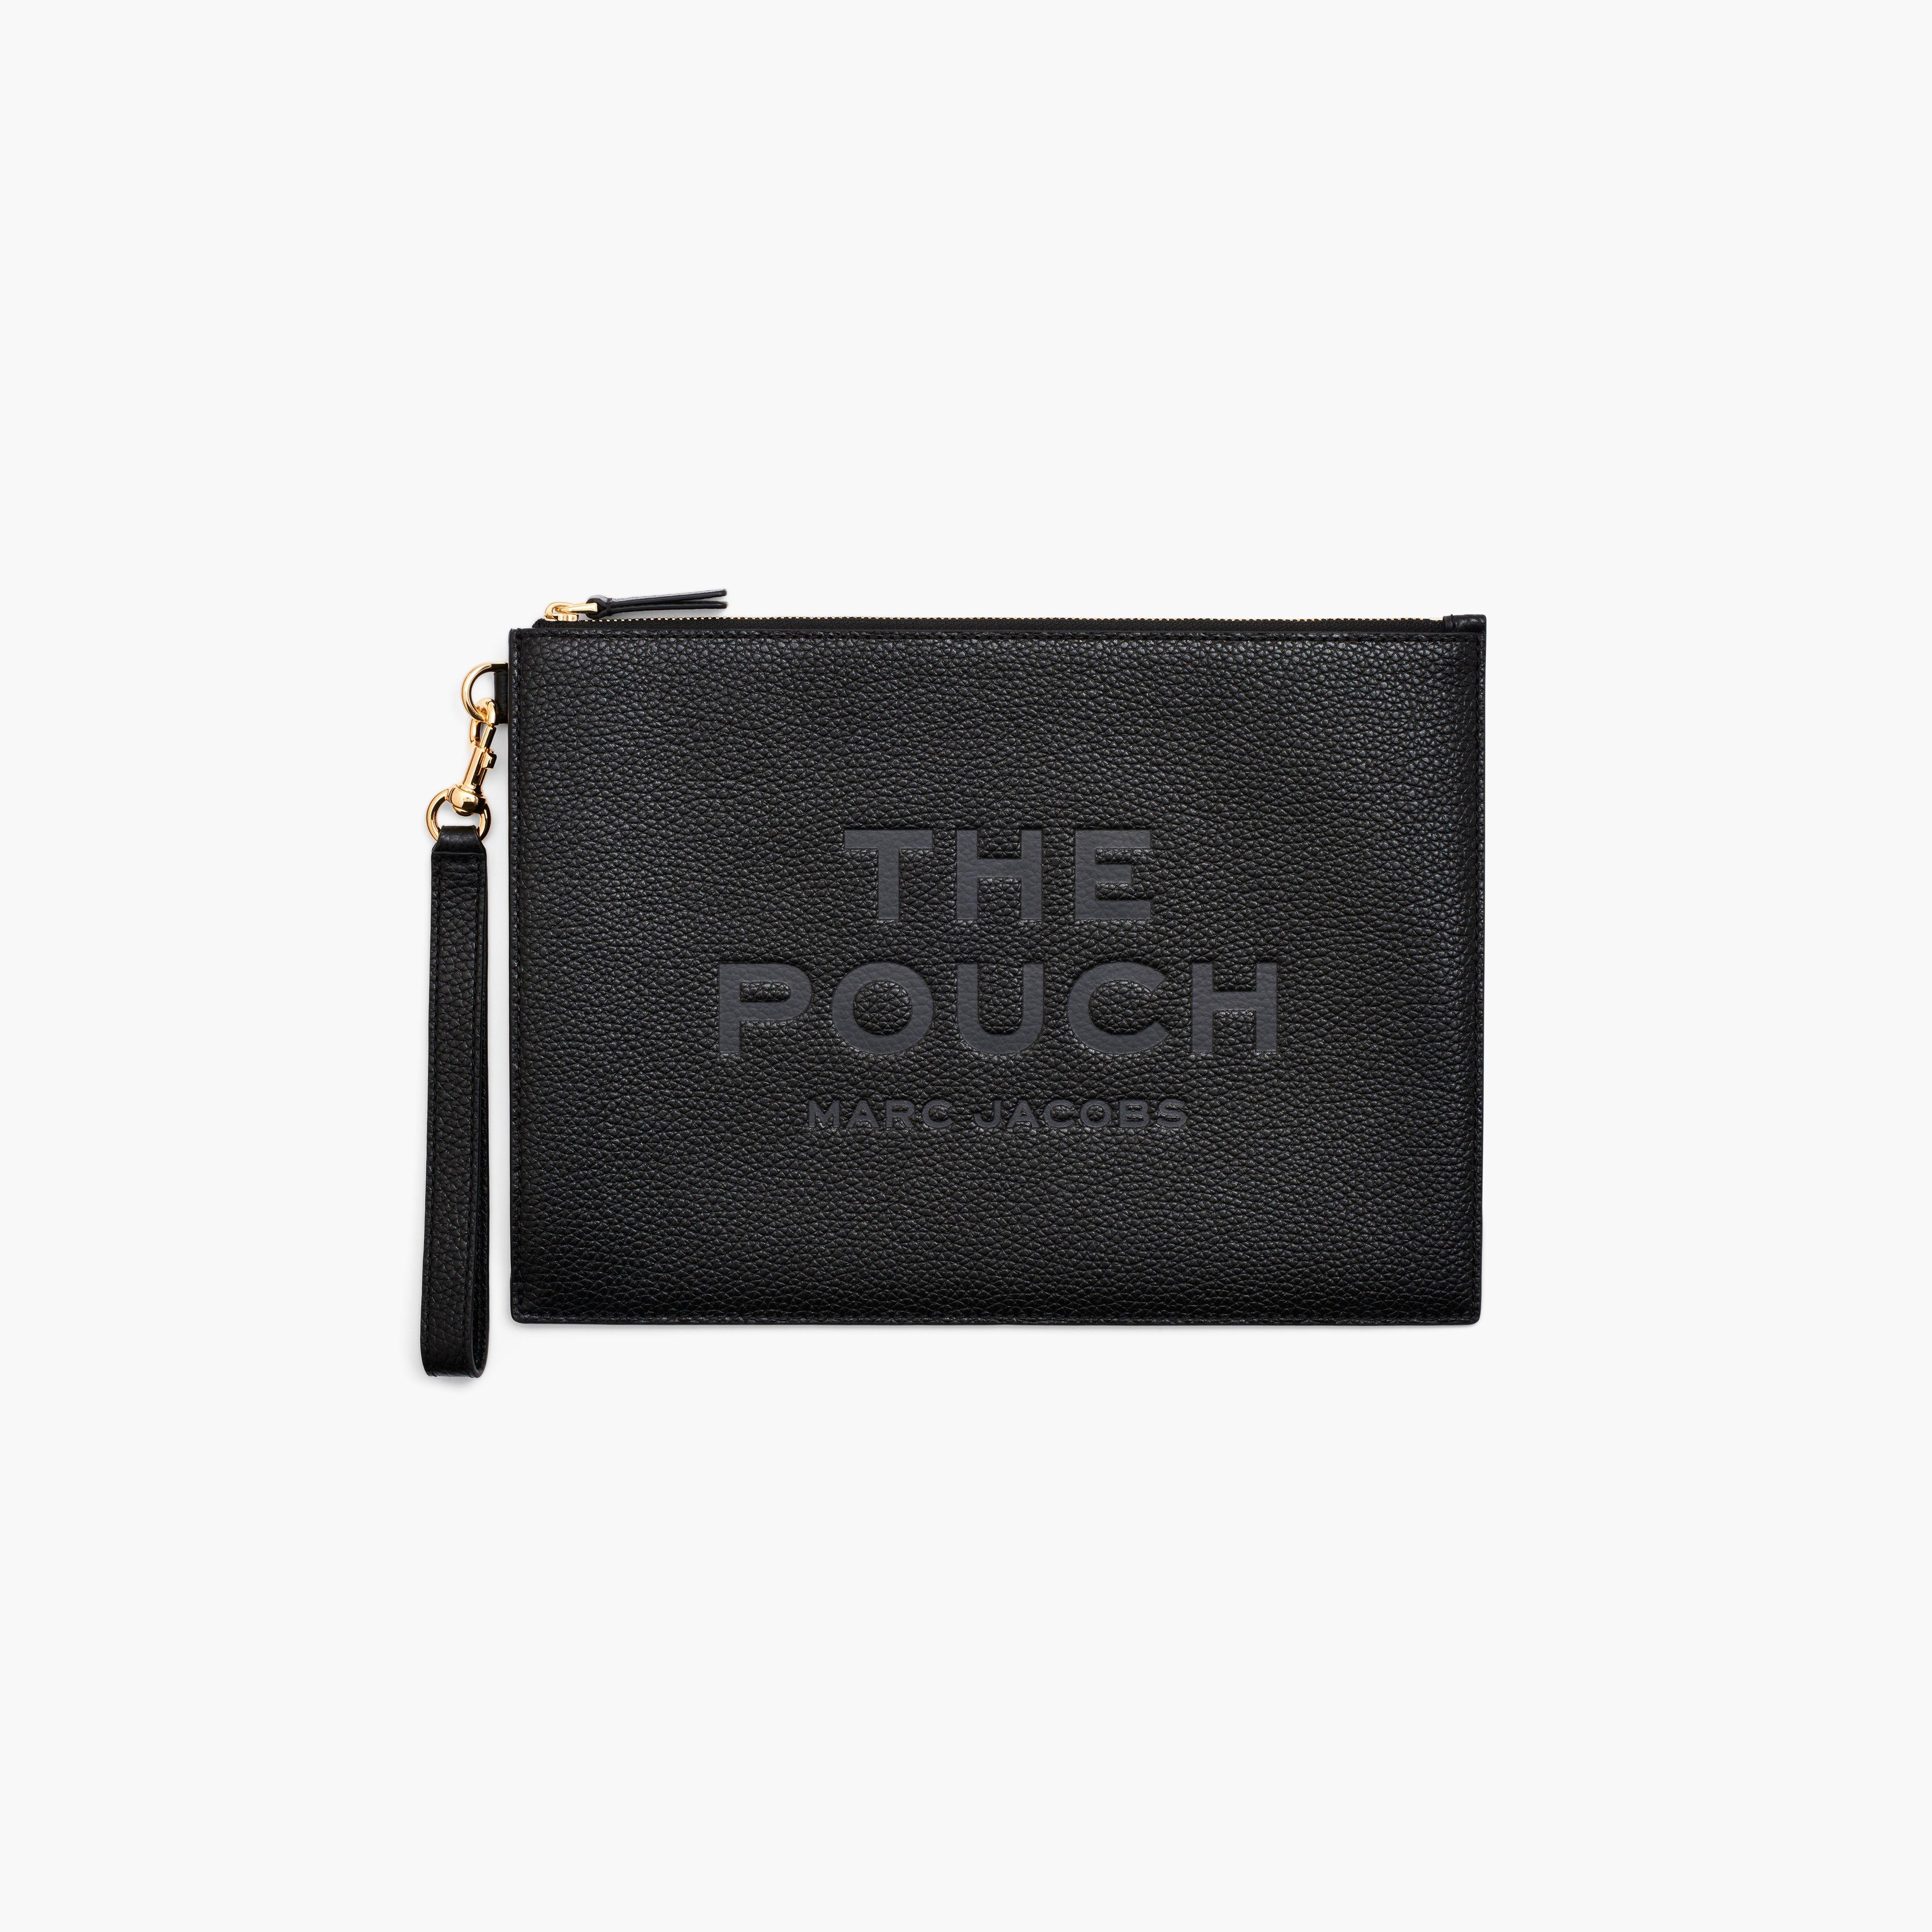 Marc by Marc jacobs The Leather Large Pouch,BLACK